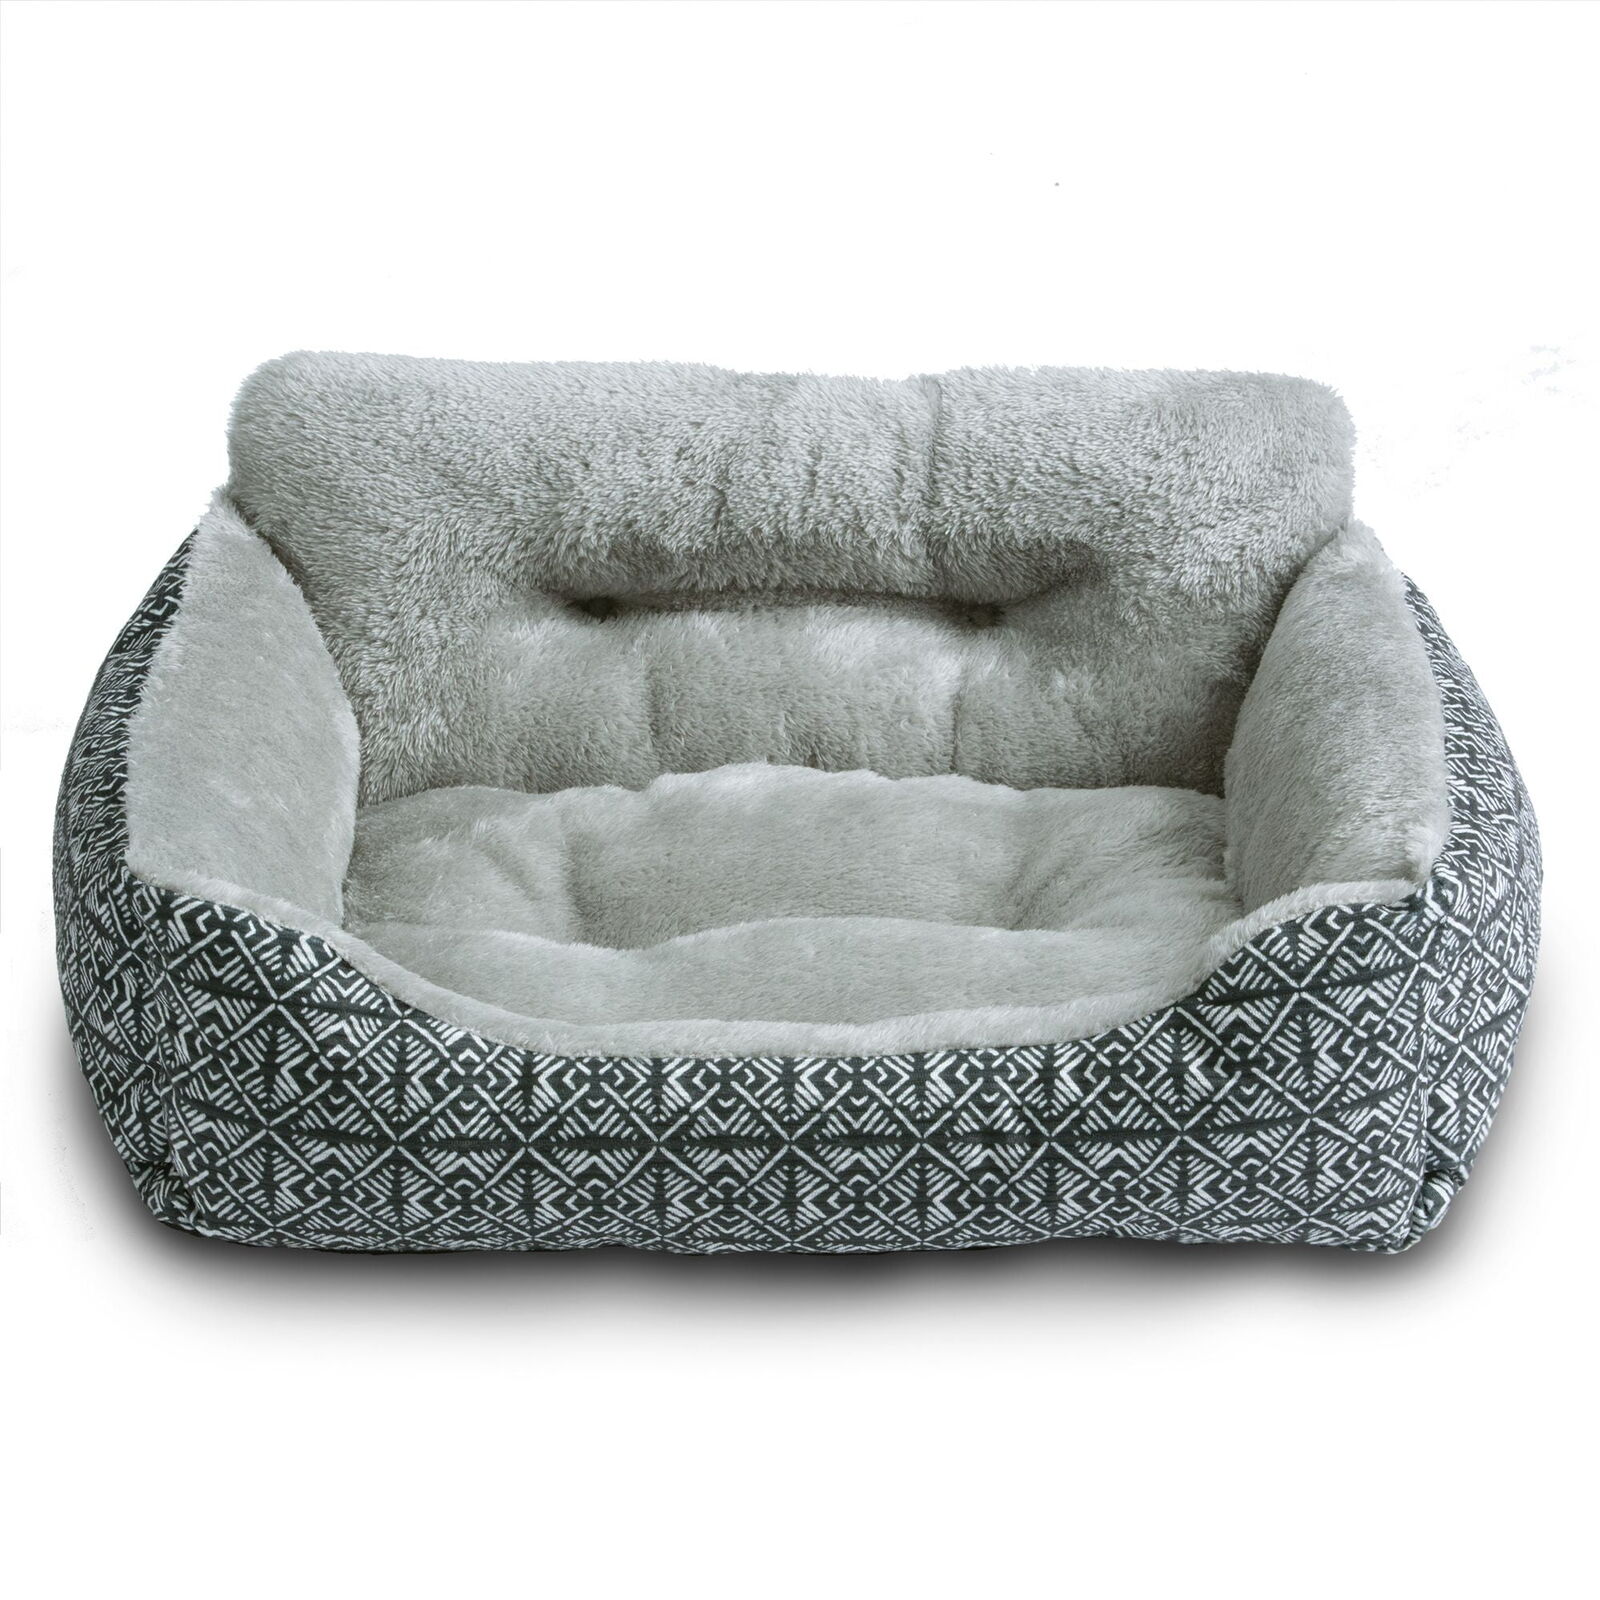 Vibrant Life Lounger Pet Bed, Small, 21” x 17”..